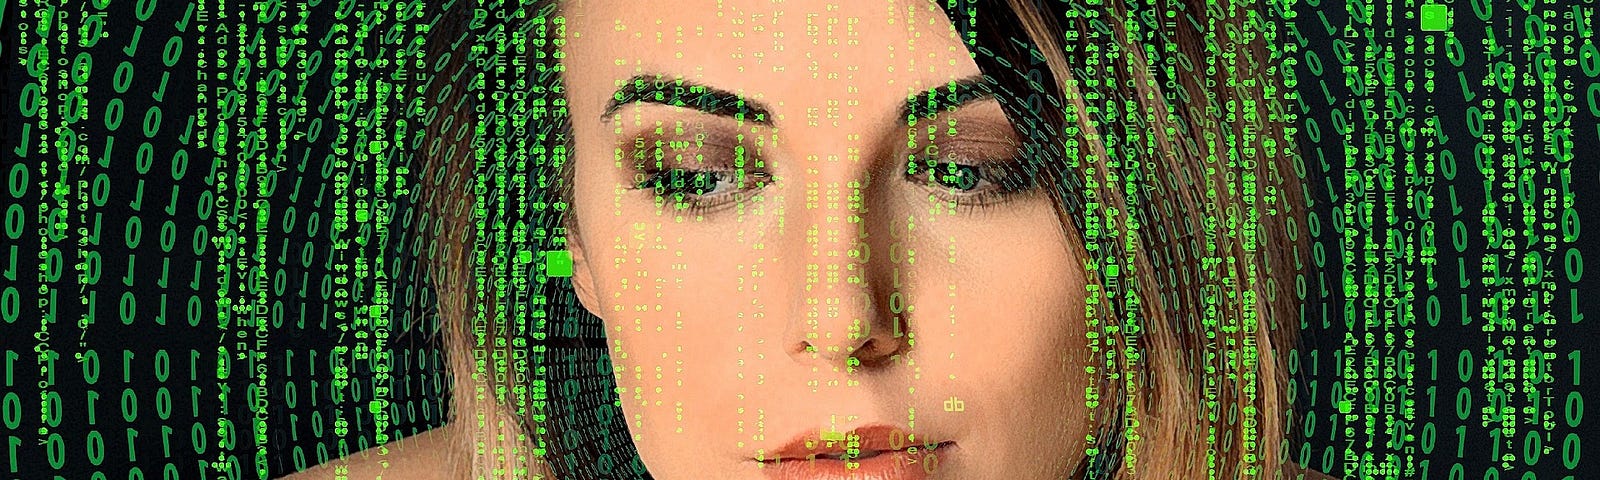 young woman, model with brown bobbed hair and bare shoulders, overlaying her face is binary display typical of computer programming, green text, matrix